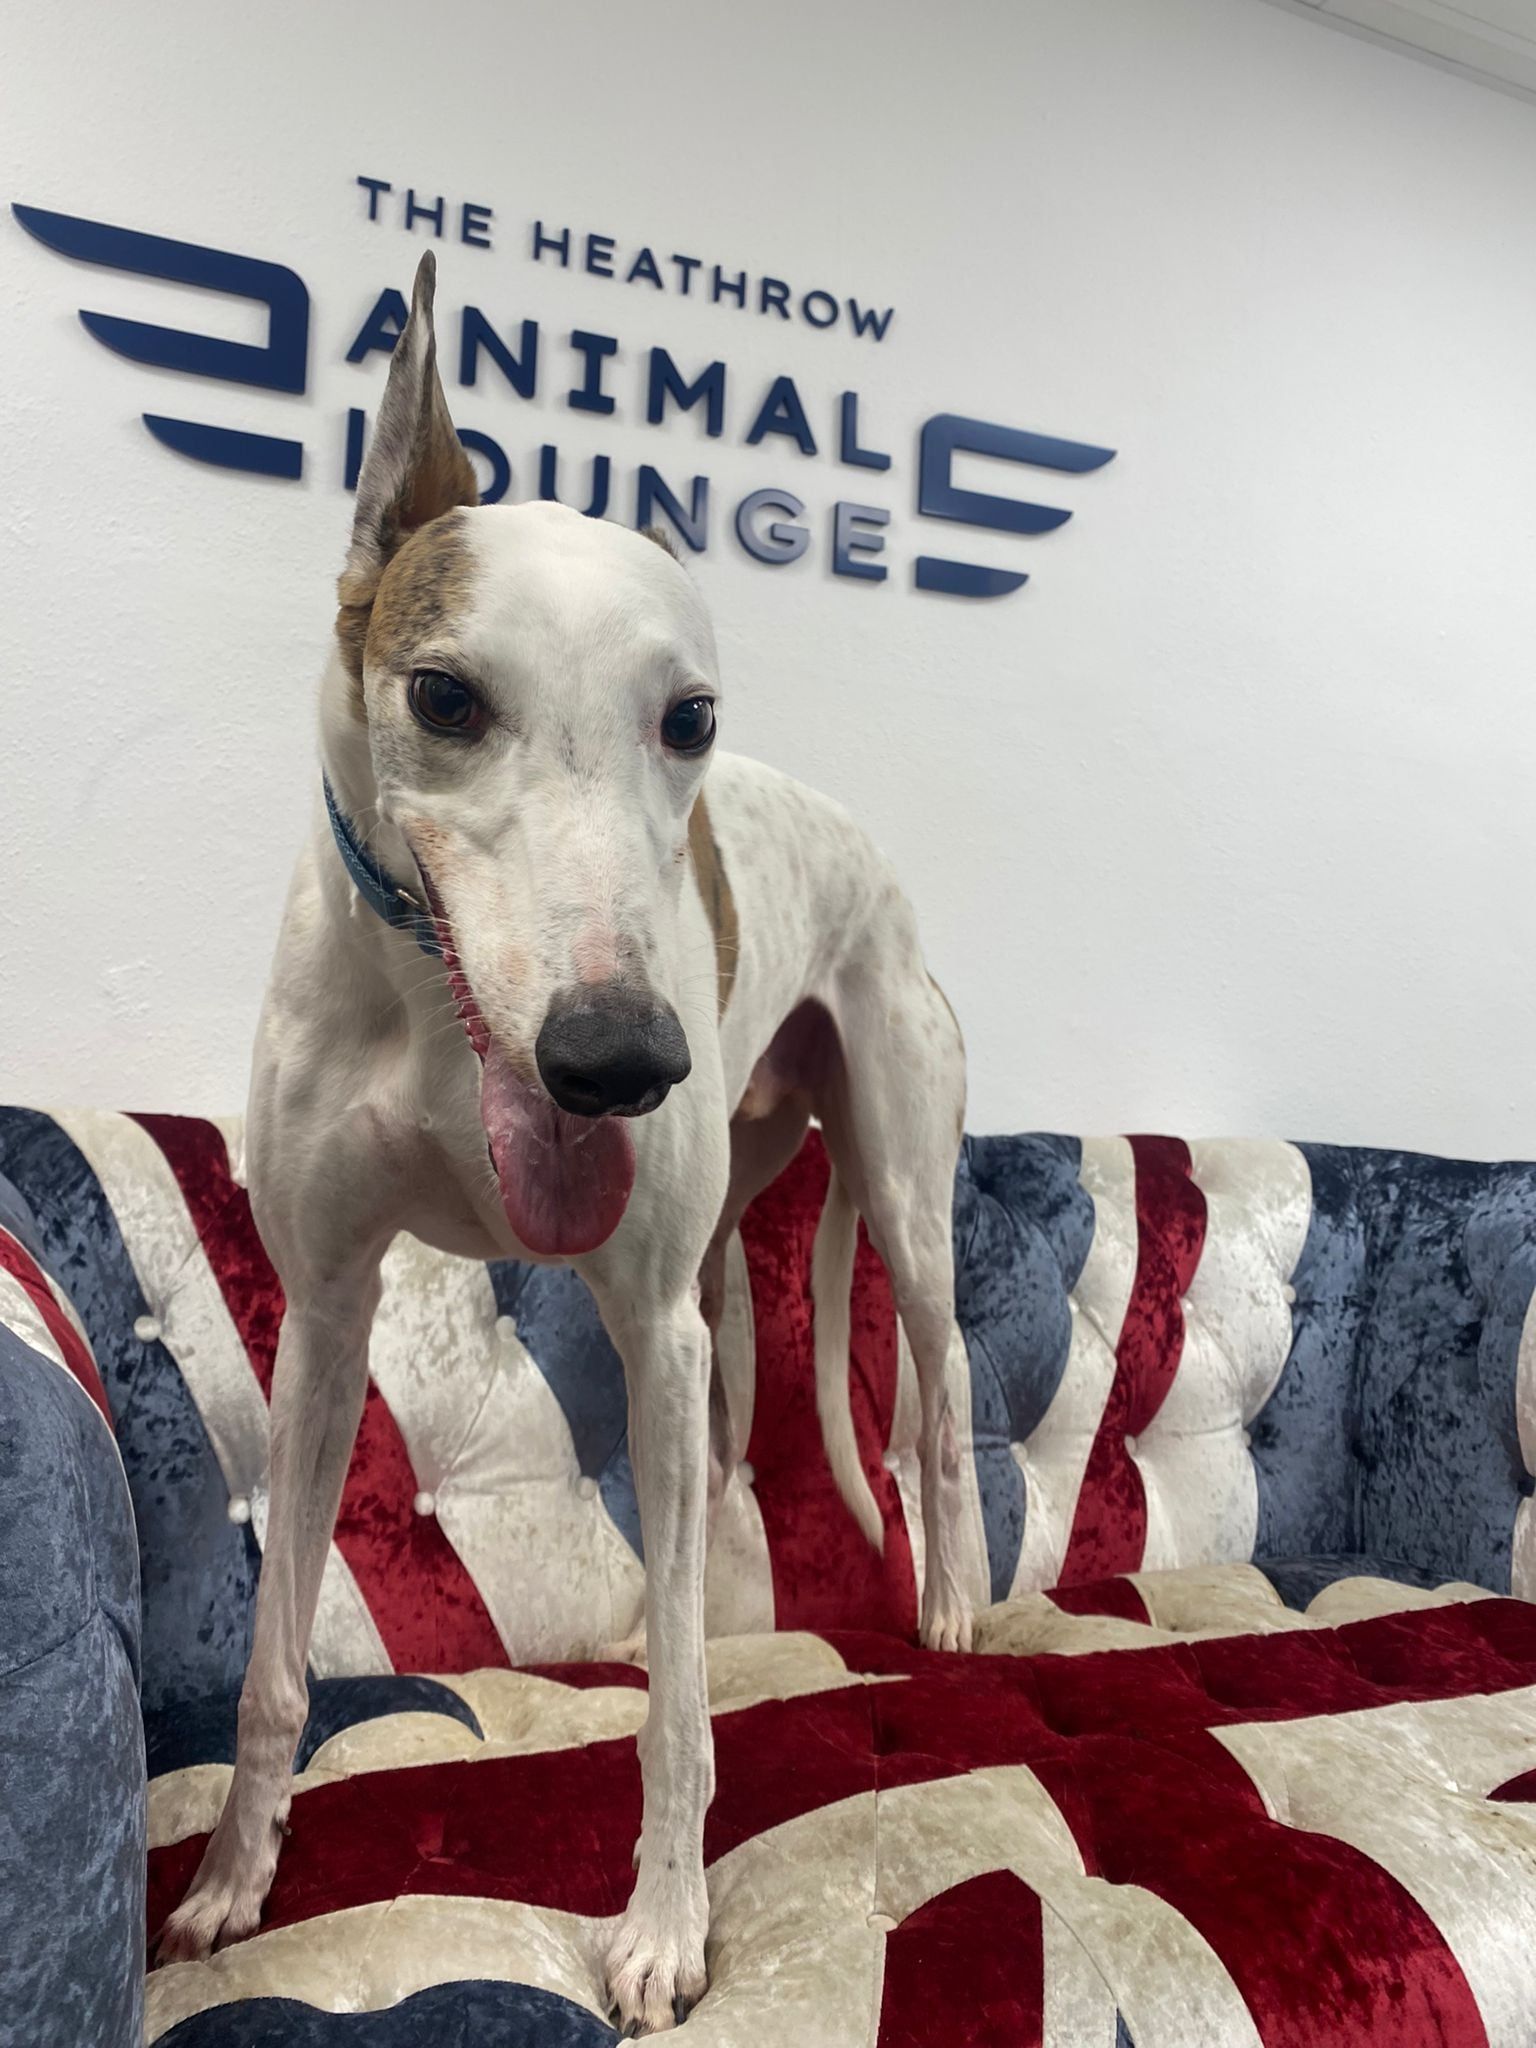 A dog is standing on a couch in front of a sign that says the heatherrow animal lounge.